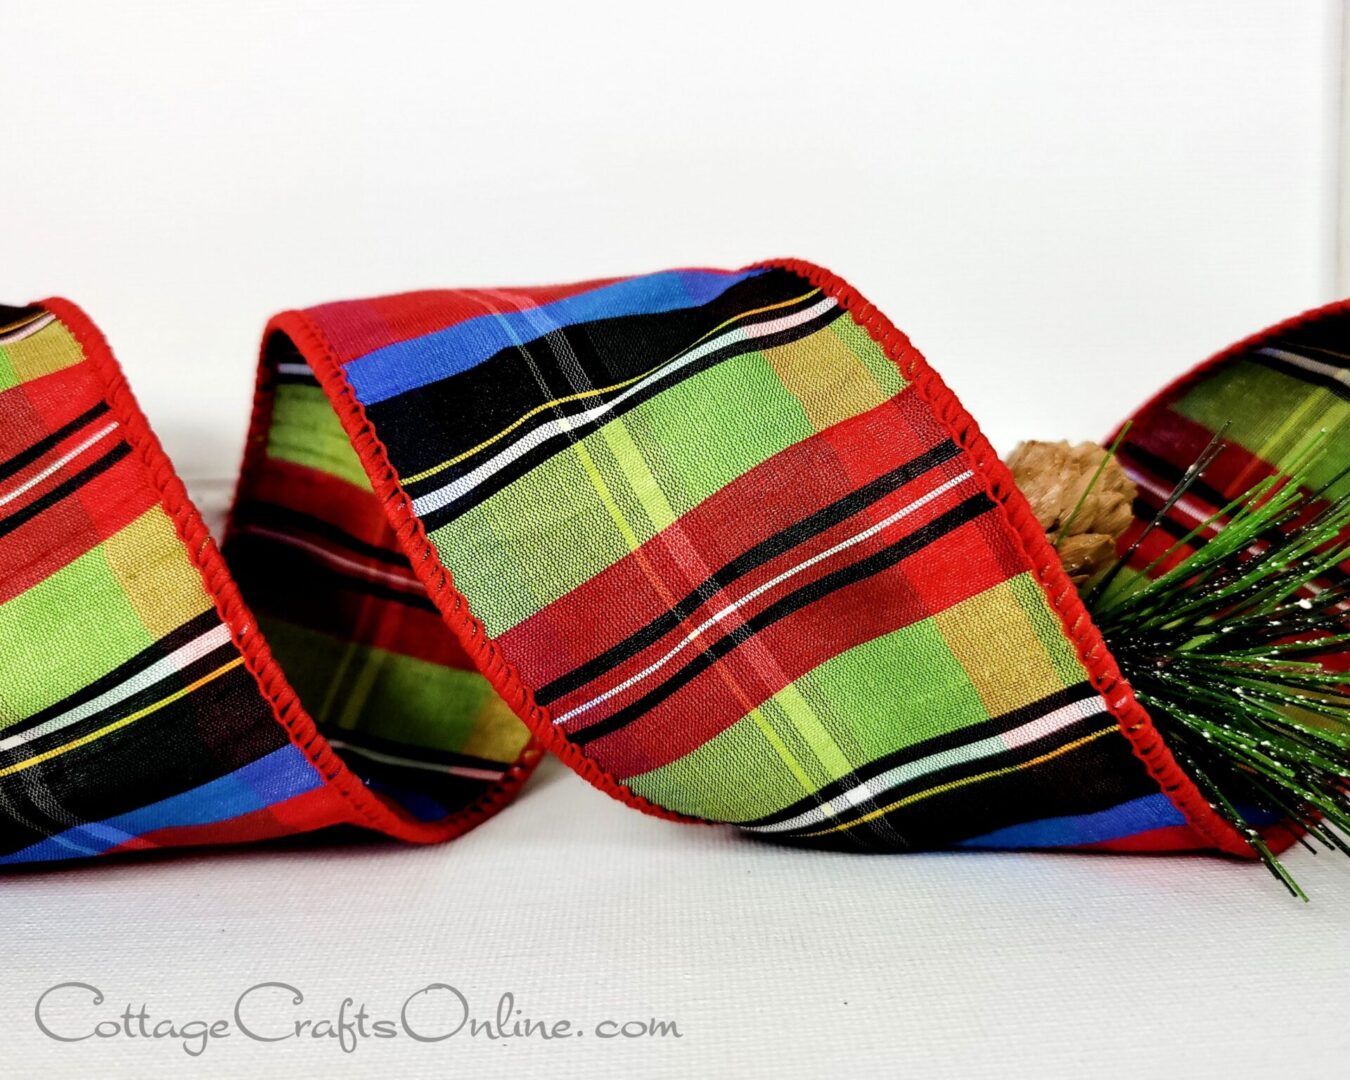 Green, red, blue, black and white tartan 2.5" wide wired ribbon from the Etsy shop of Cottage Crafts Online.